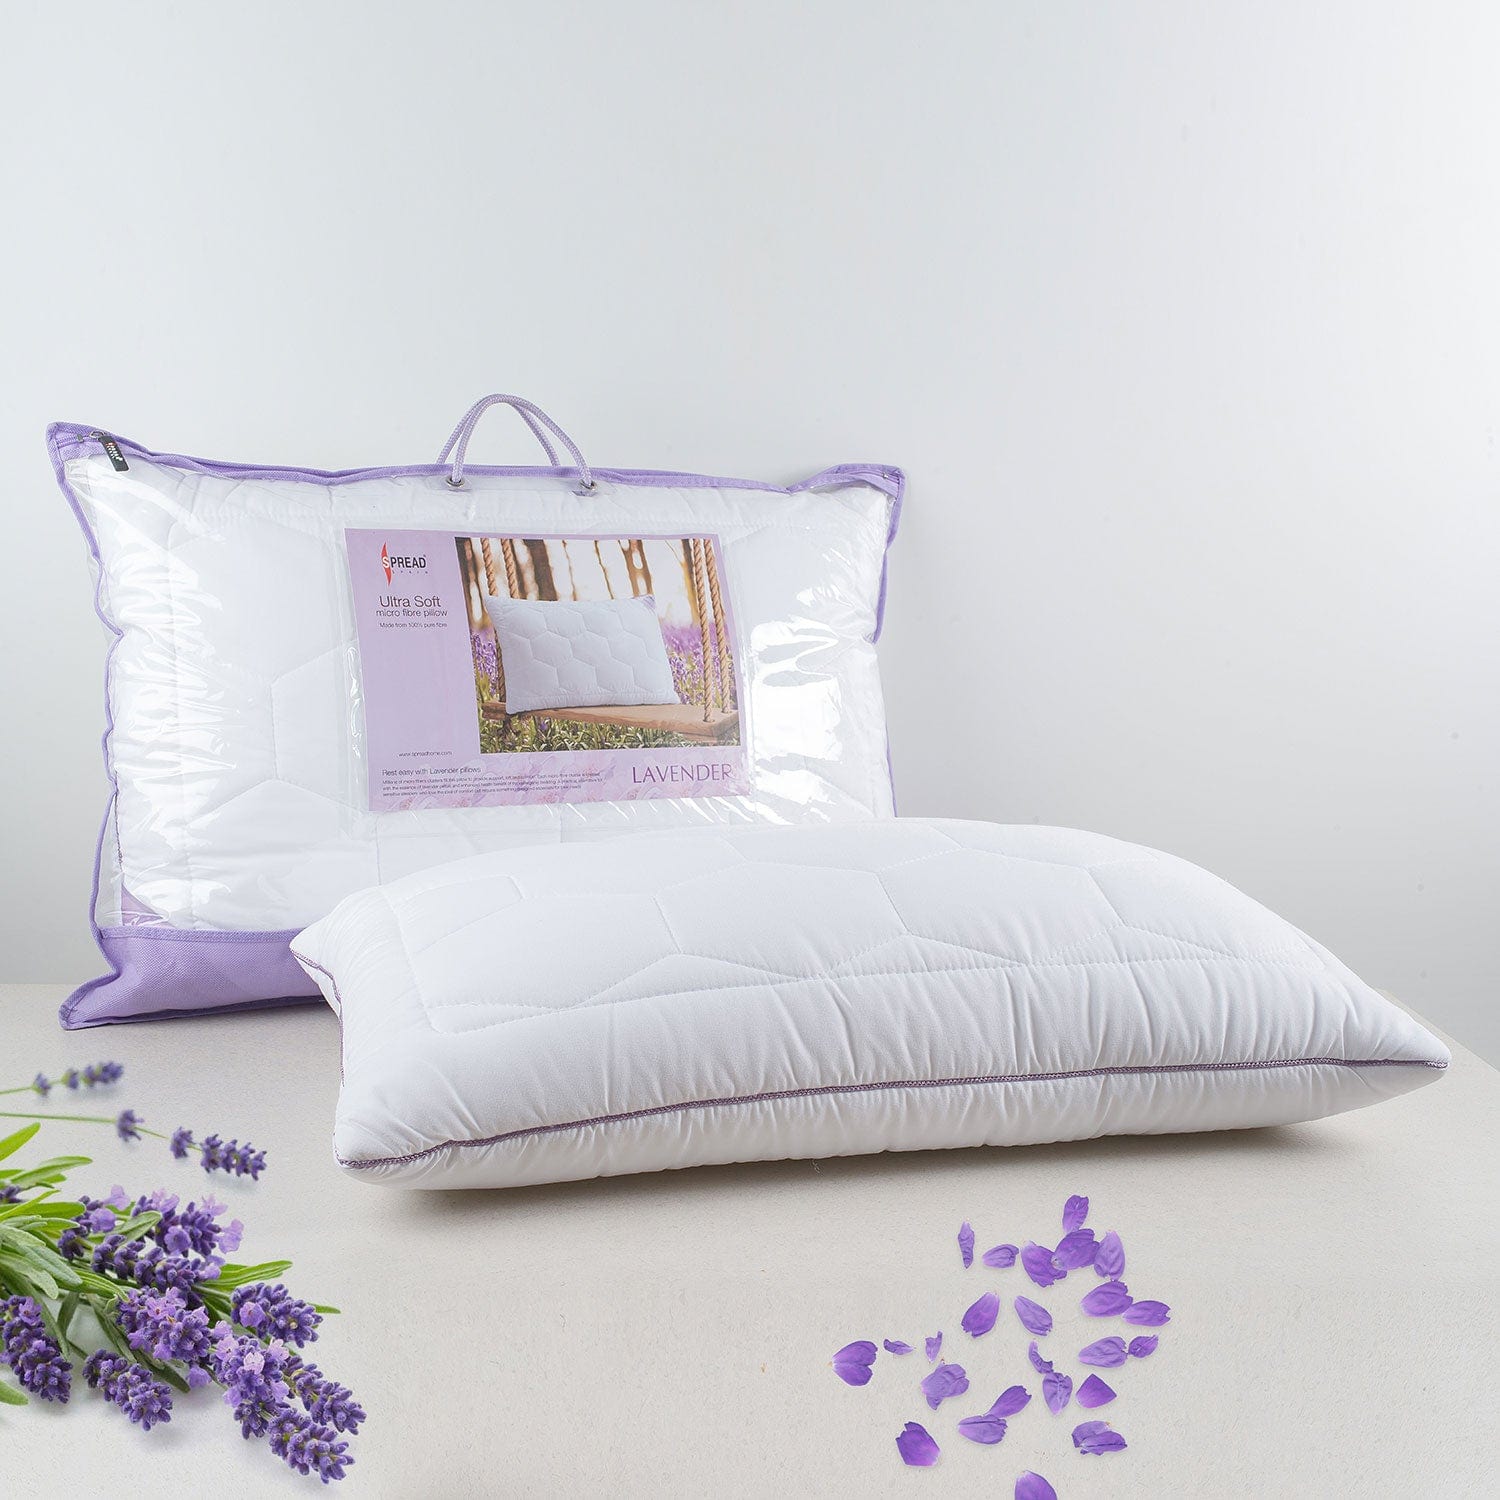 Lavender With Suede Fabric And Micro Fibre Inside Pillow | Pillow for The Best Sleep